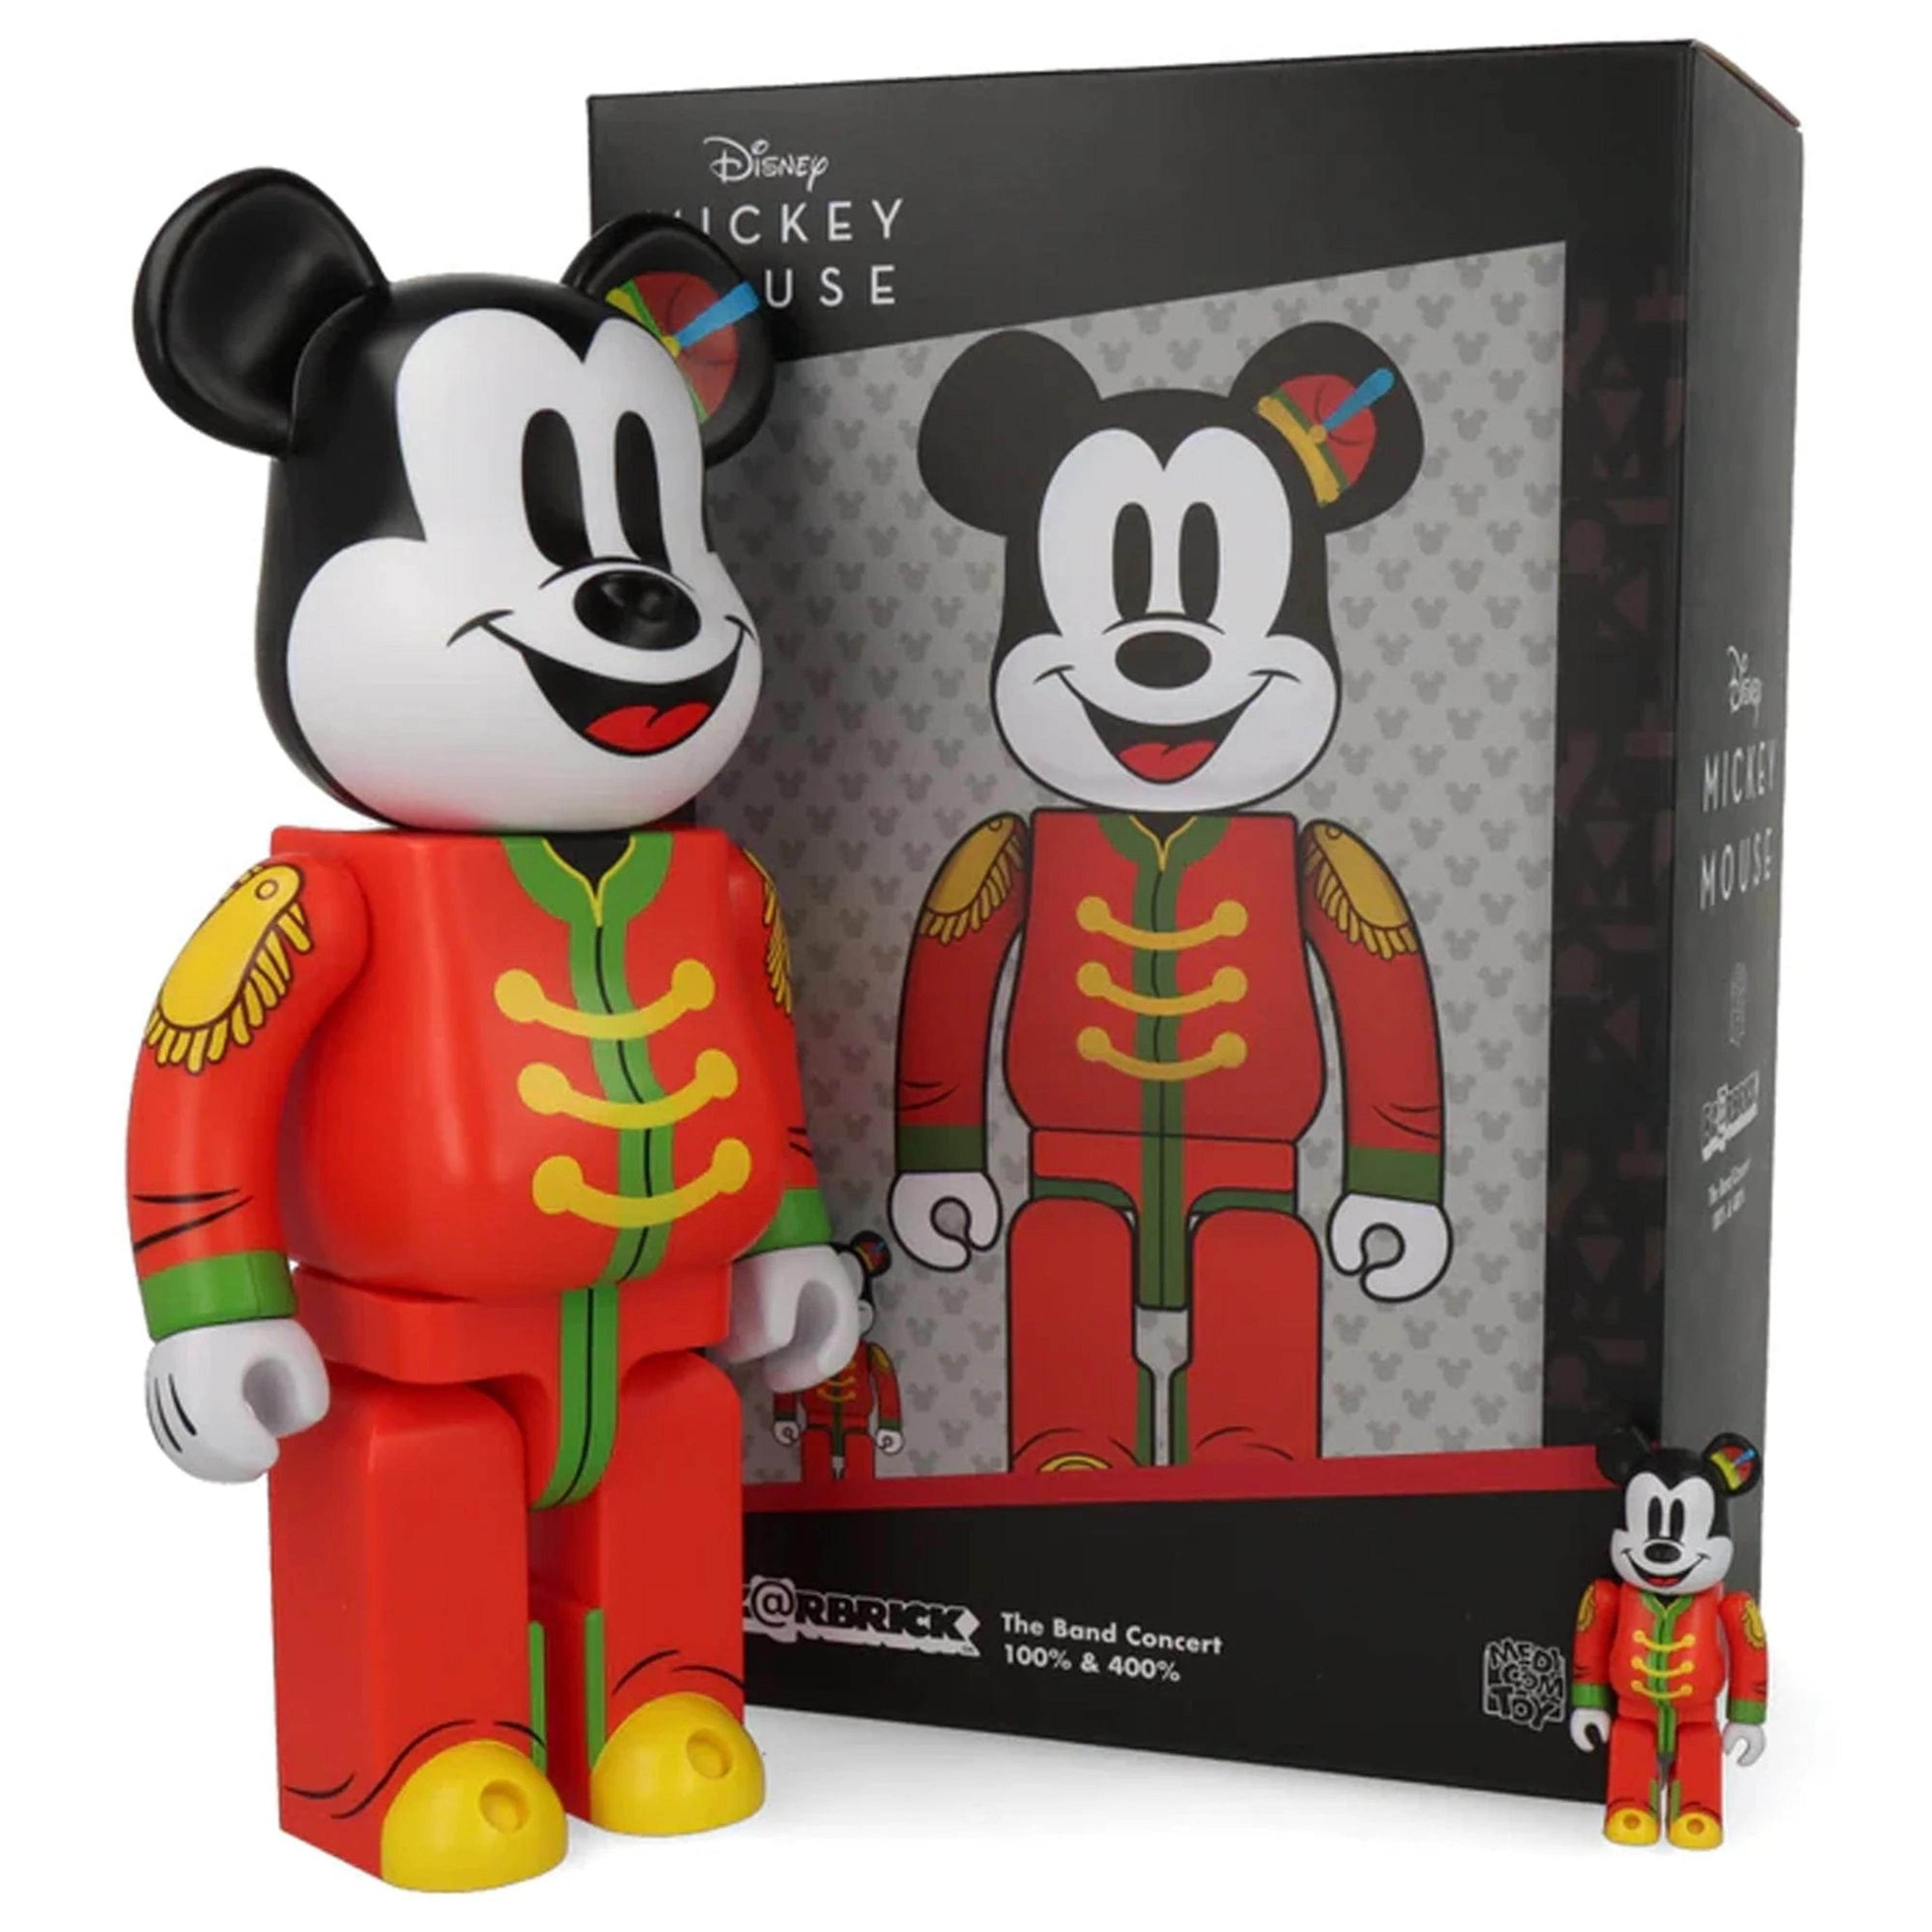 Alternate View 2 of BE@RBRICK MICKEY MOUSE THE BAND CONCERT 400％ + 100%